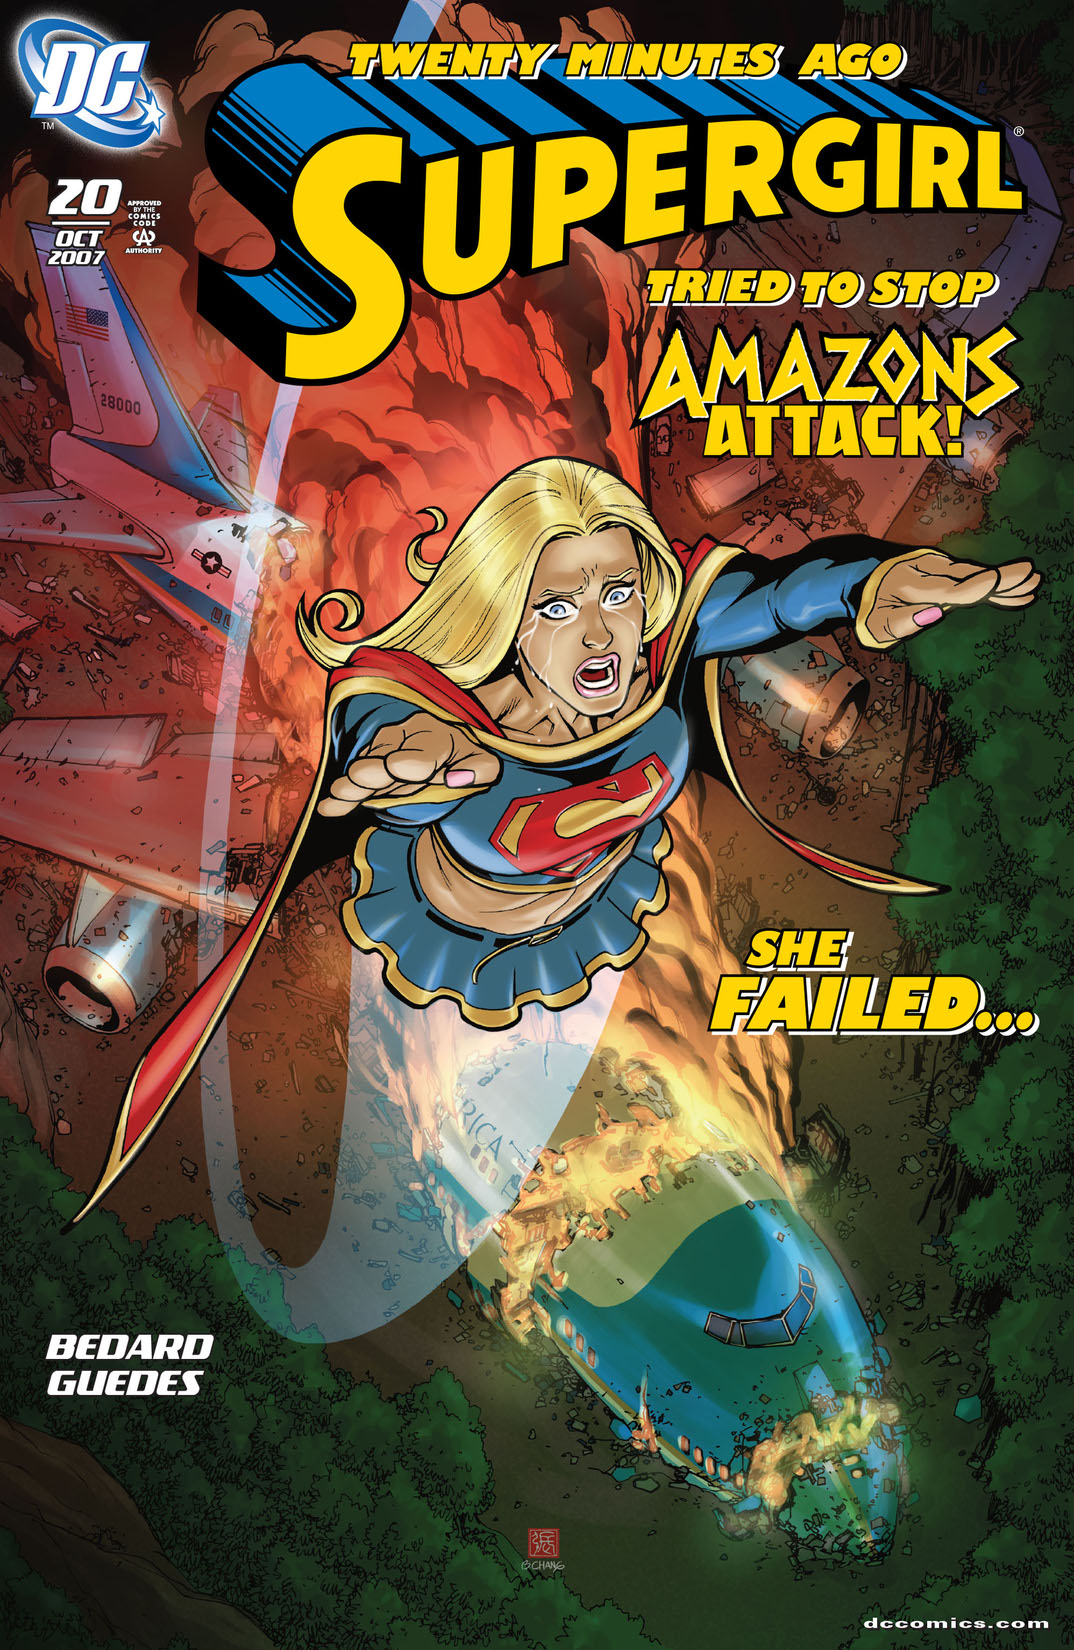 Supergirl (2005-) #20 preview images